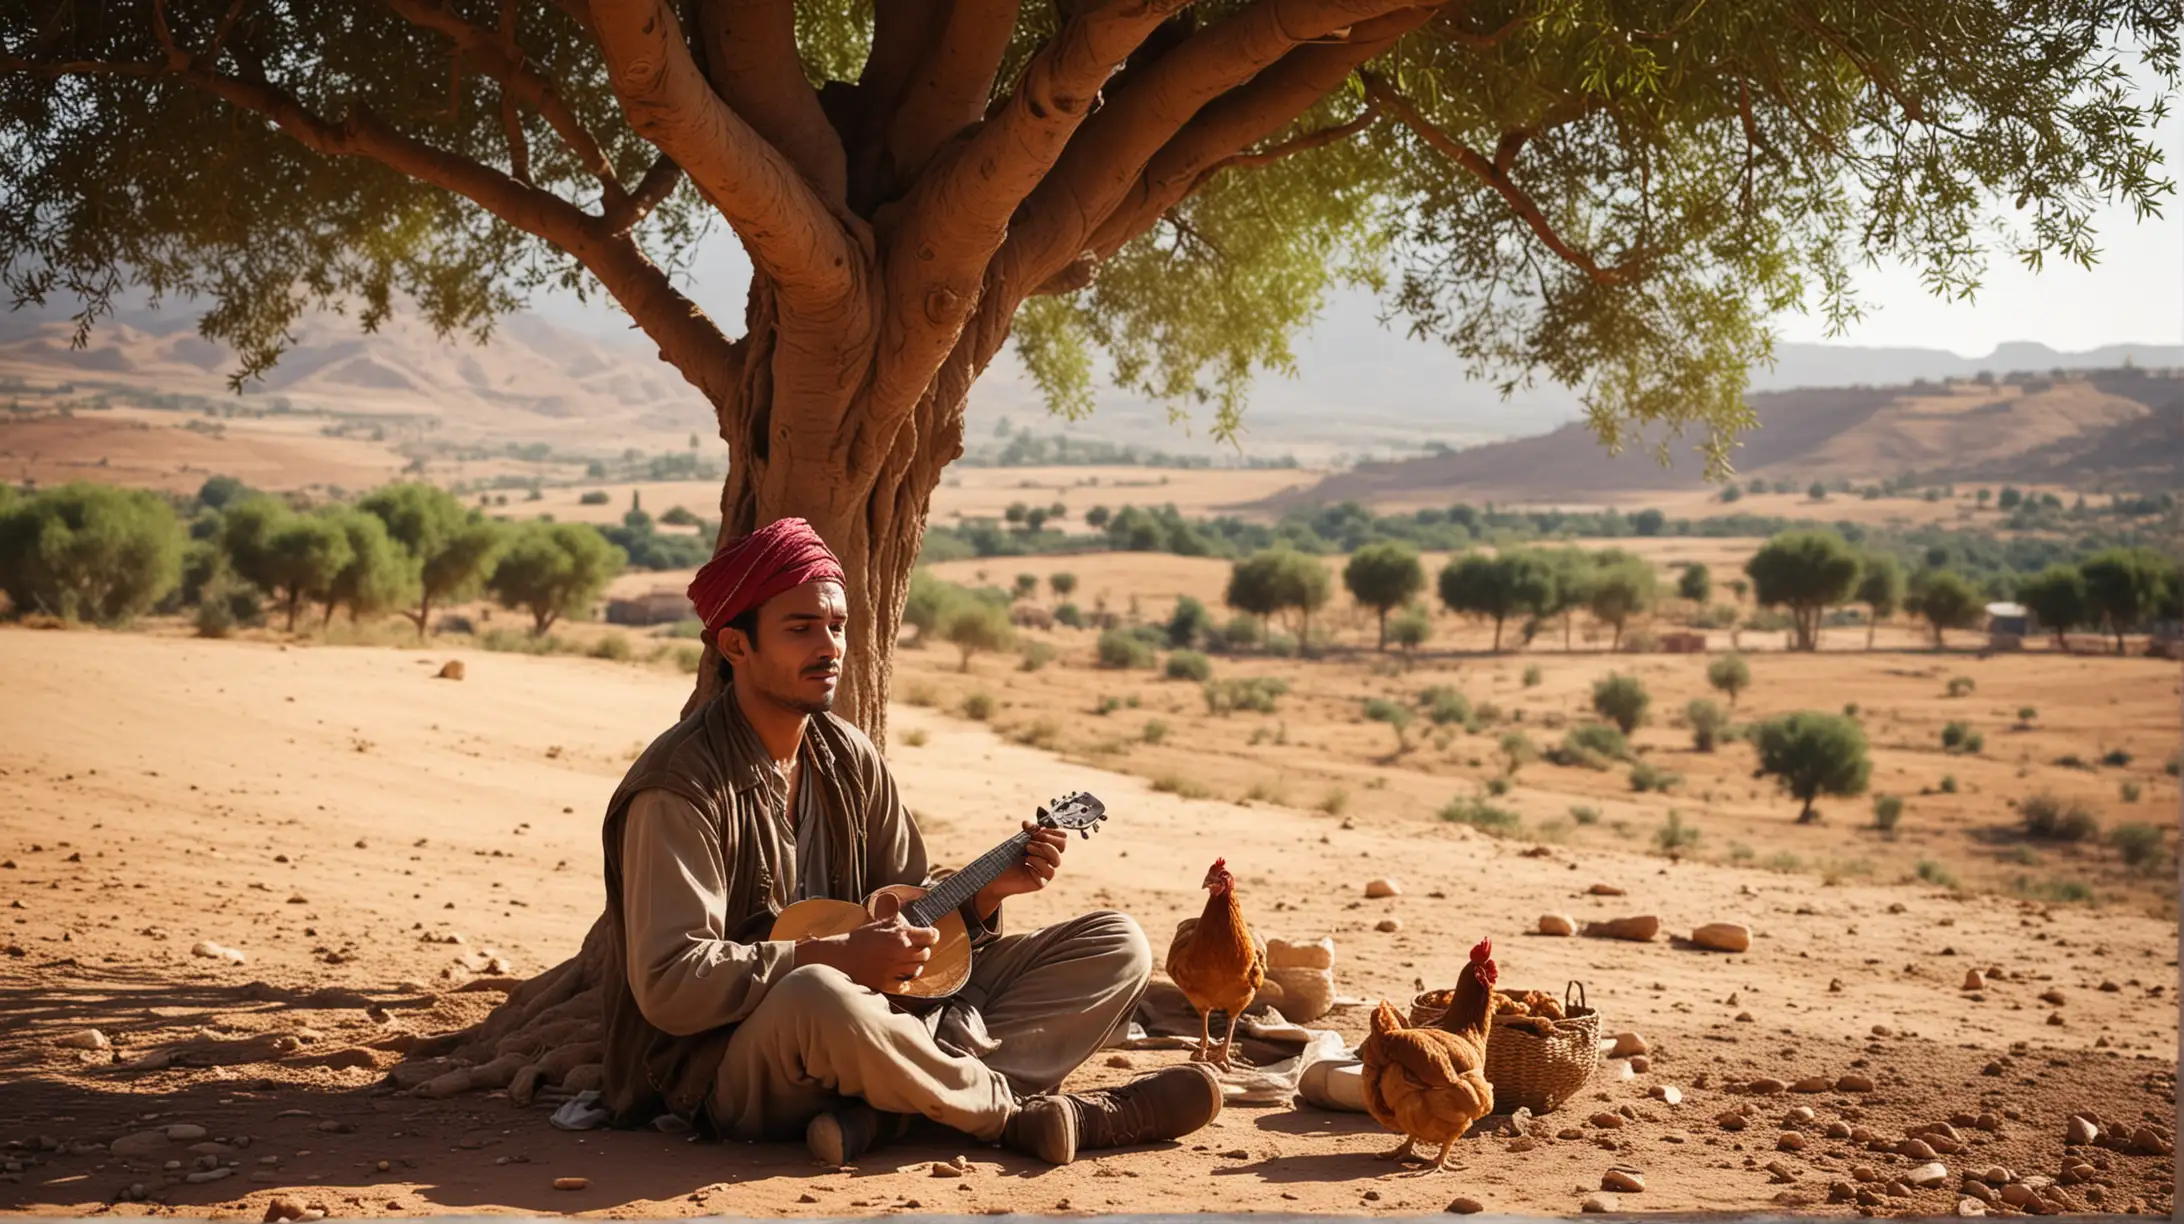 lonely Moroccan musician,, sits under a tree, at the side of a path in the country side, eating chicken with his hands, a traditional Moroccan village can be seen in the distance, midday light, cinematic, close-up shot